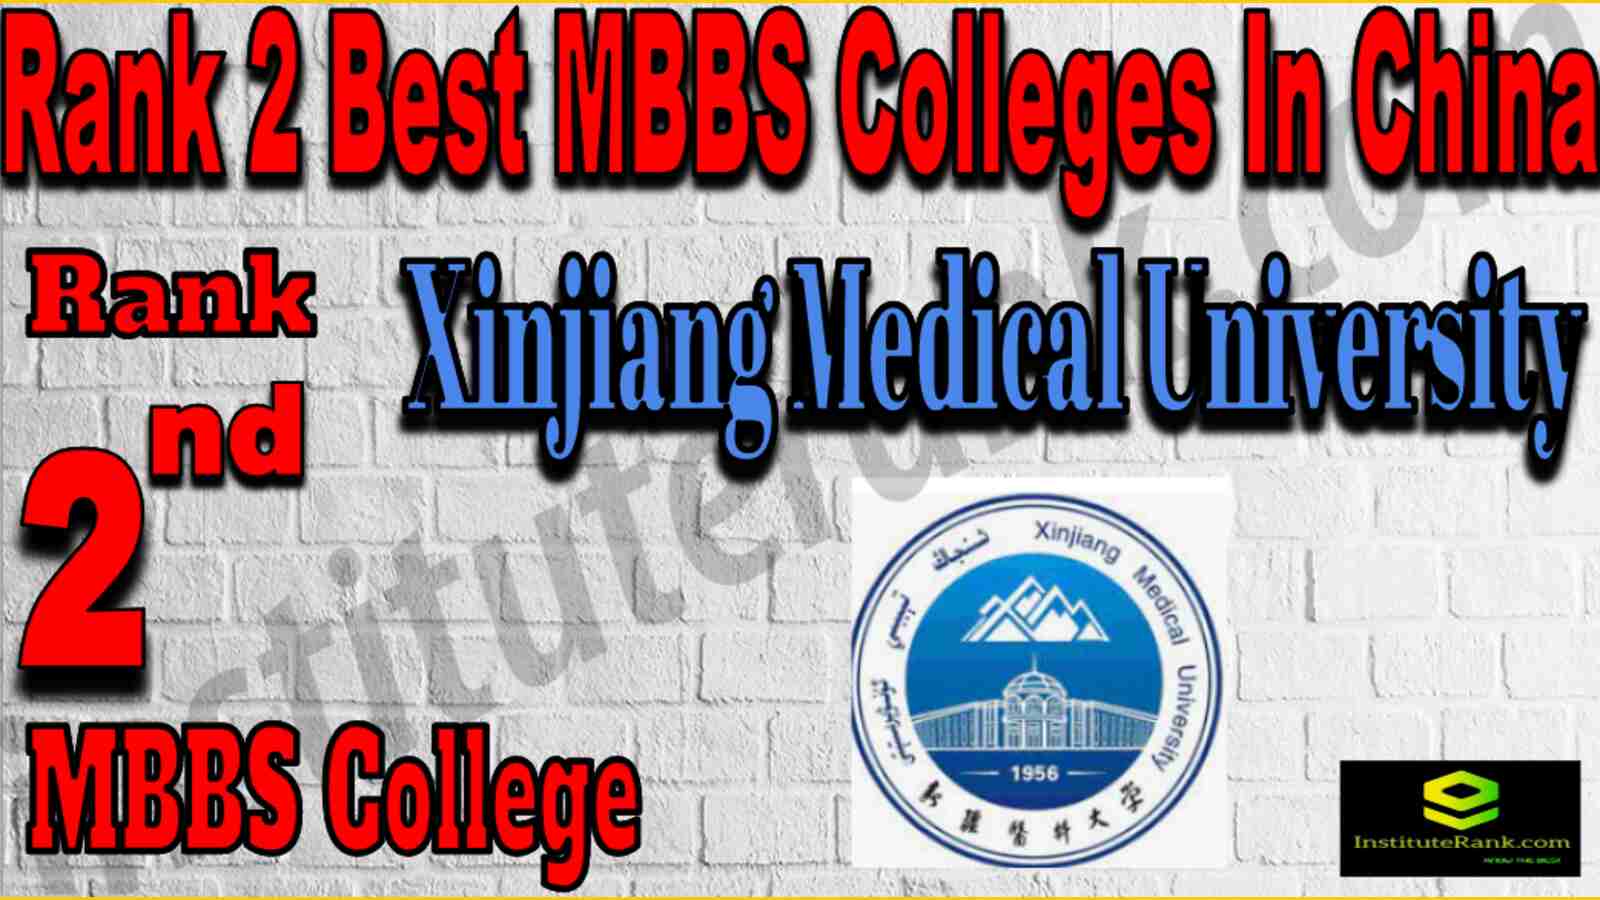 Rank 2 Best MBBS Colleges In China